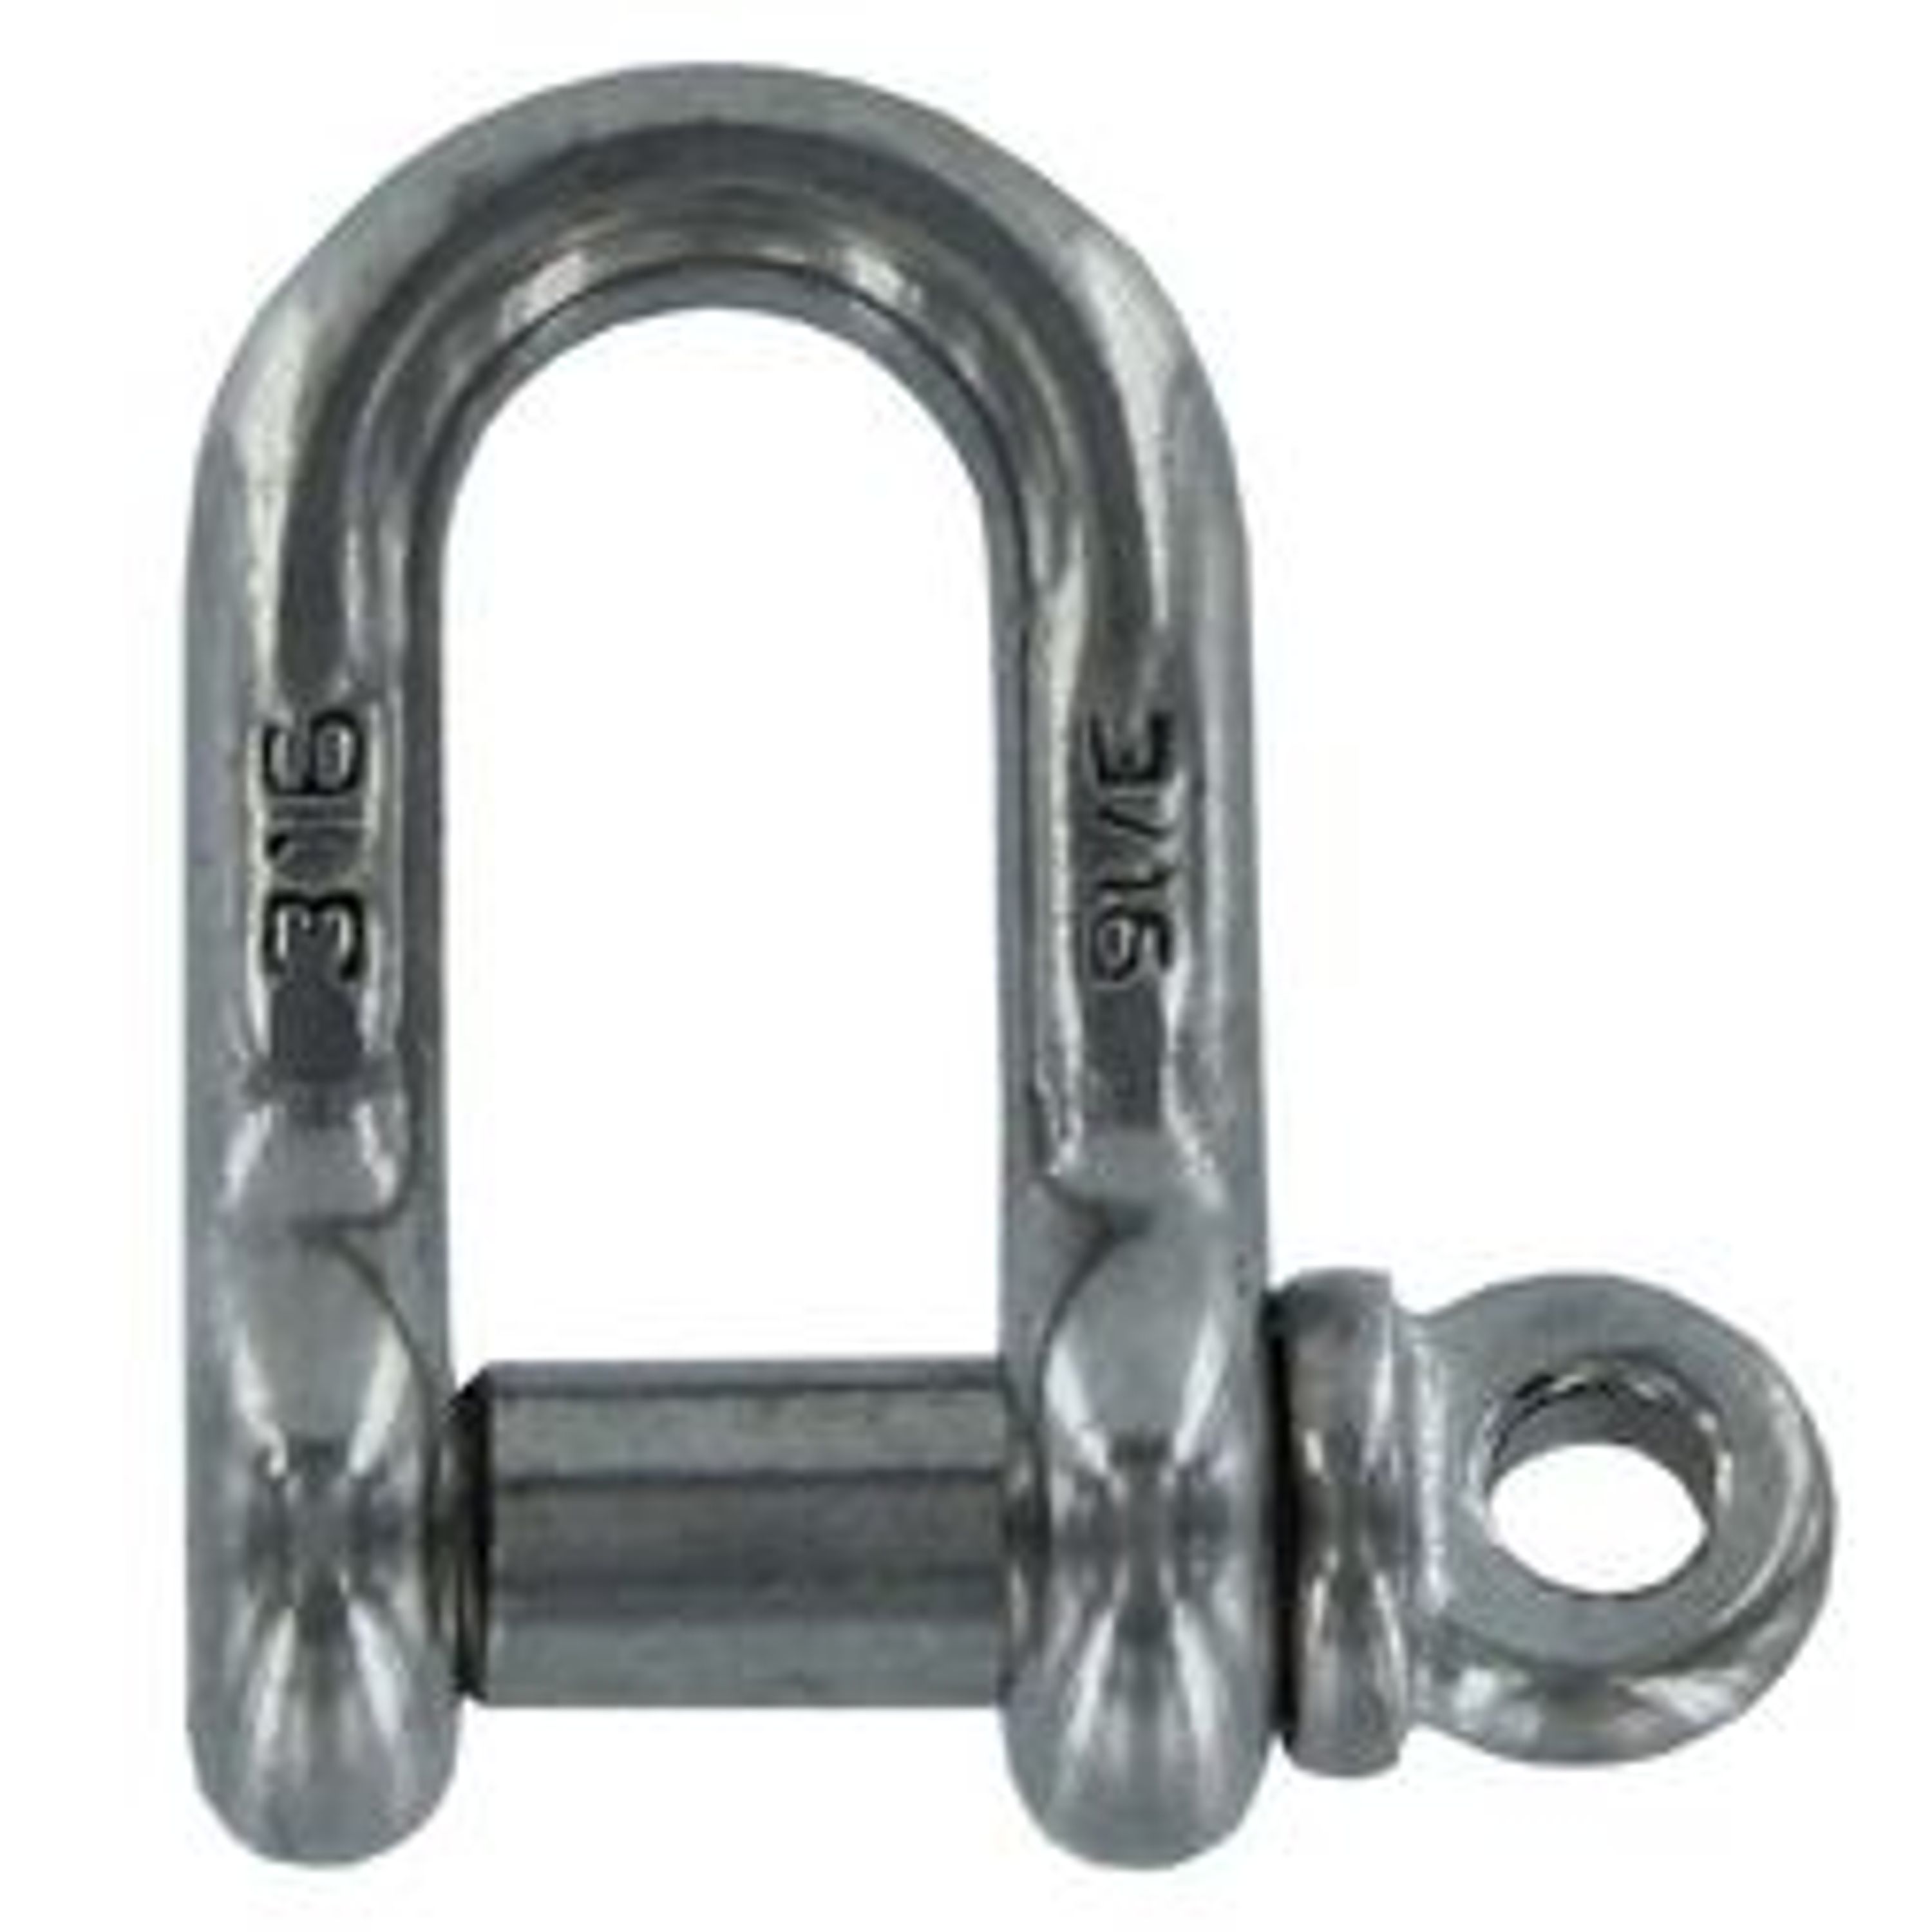 7/16 4-Pack Extreme Max 3006.8321.4 BoatTector Stainless Steel Anchor Shackle 